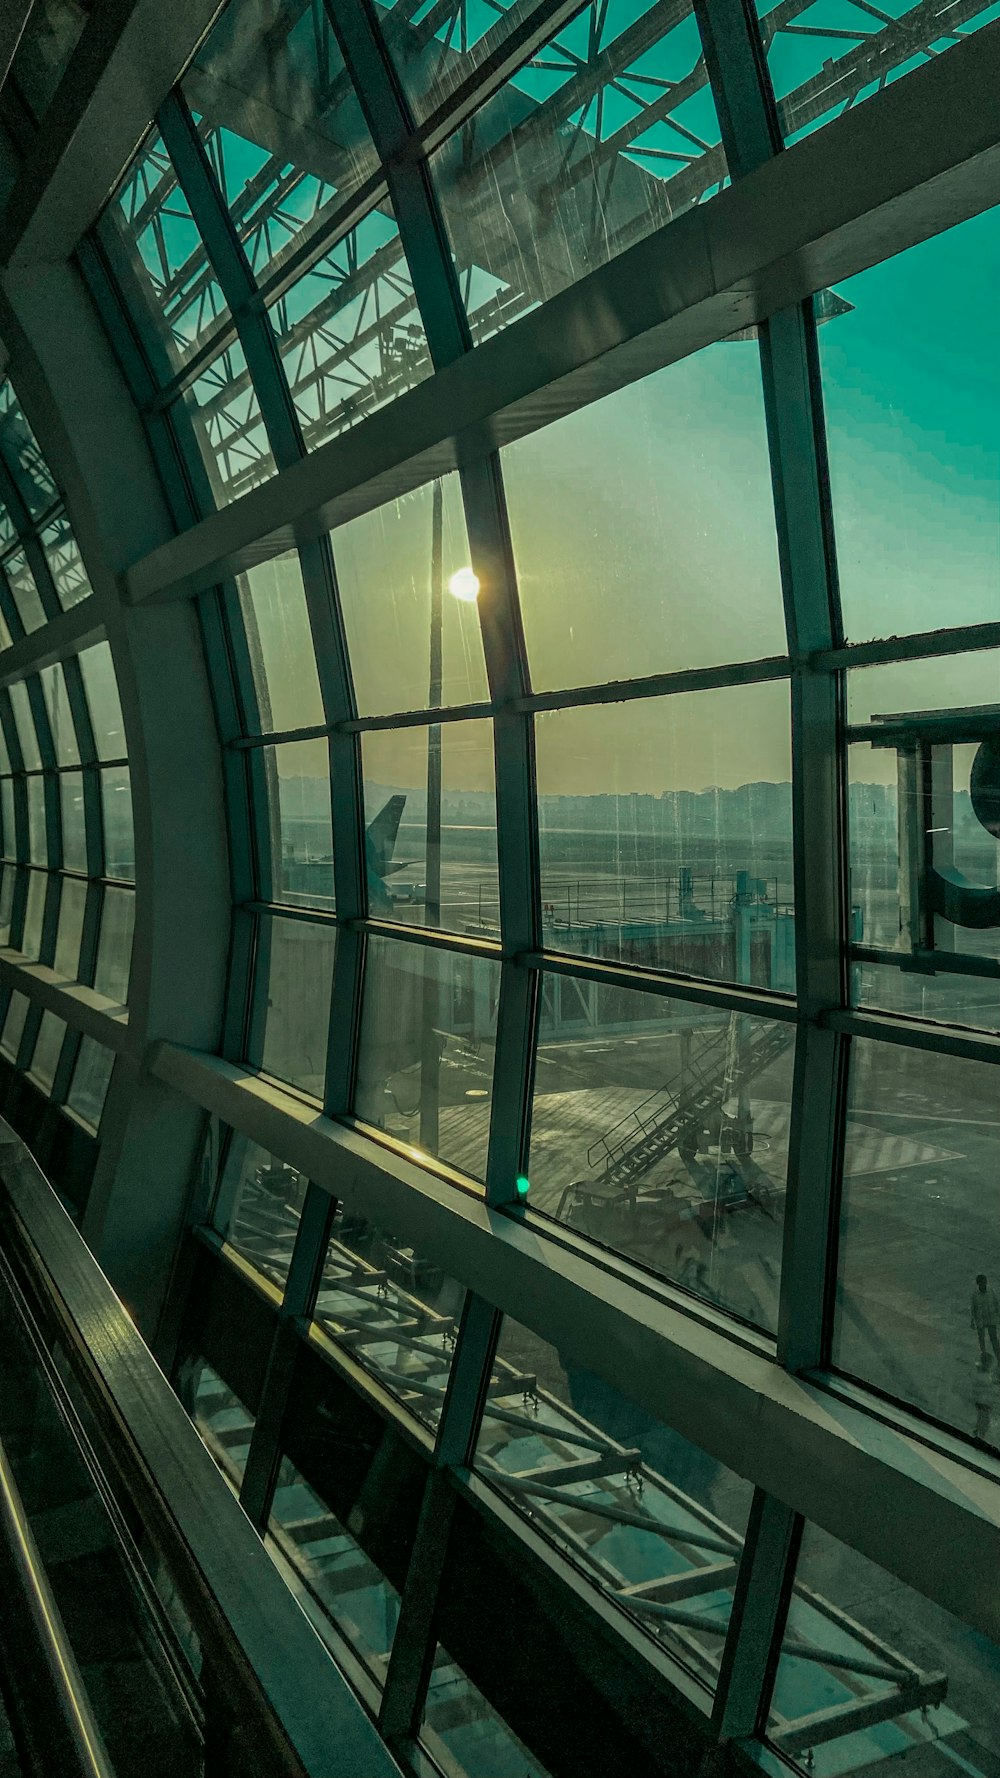 the sun is shining through the windows of an airport